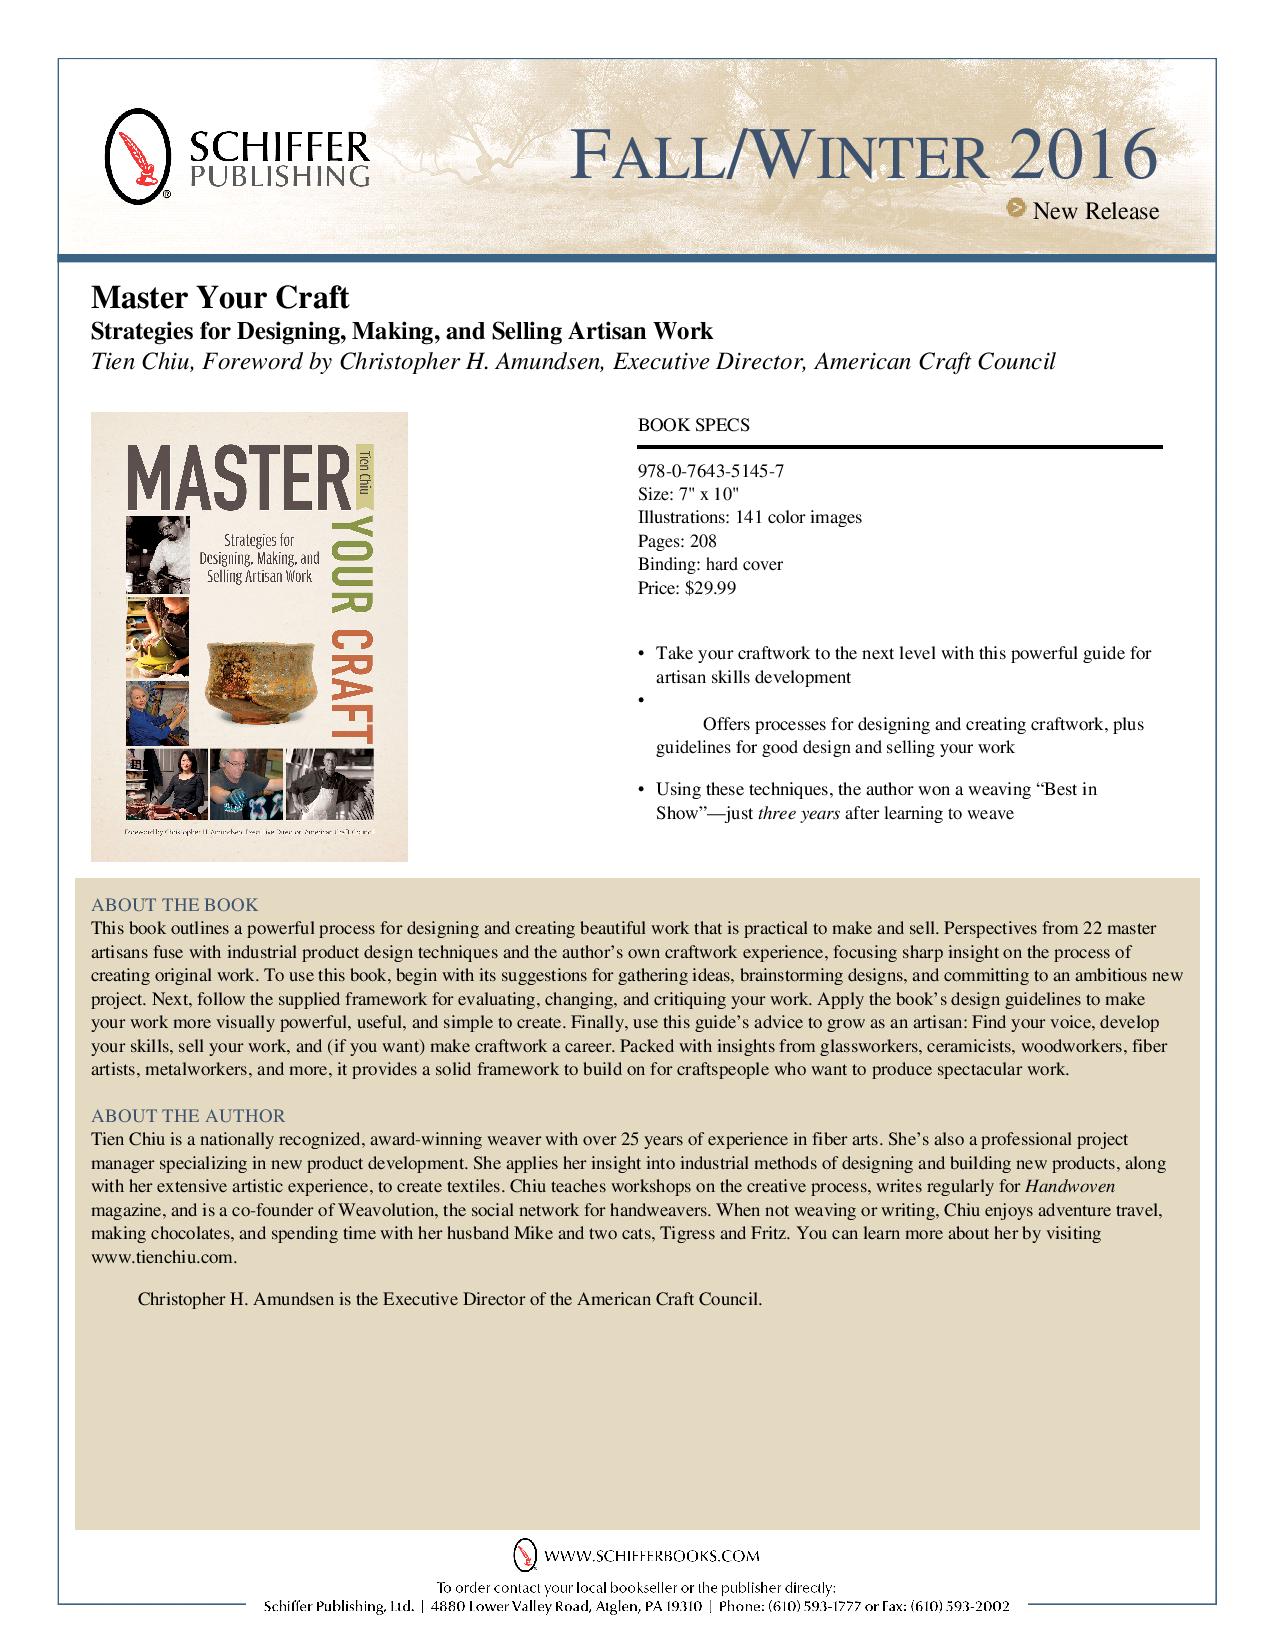 Sales flyer for Master Your Craft: Designing, Making, and Selling Artisan Work